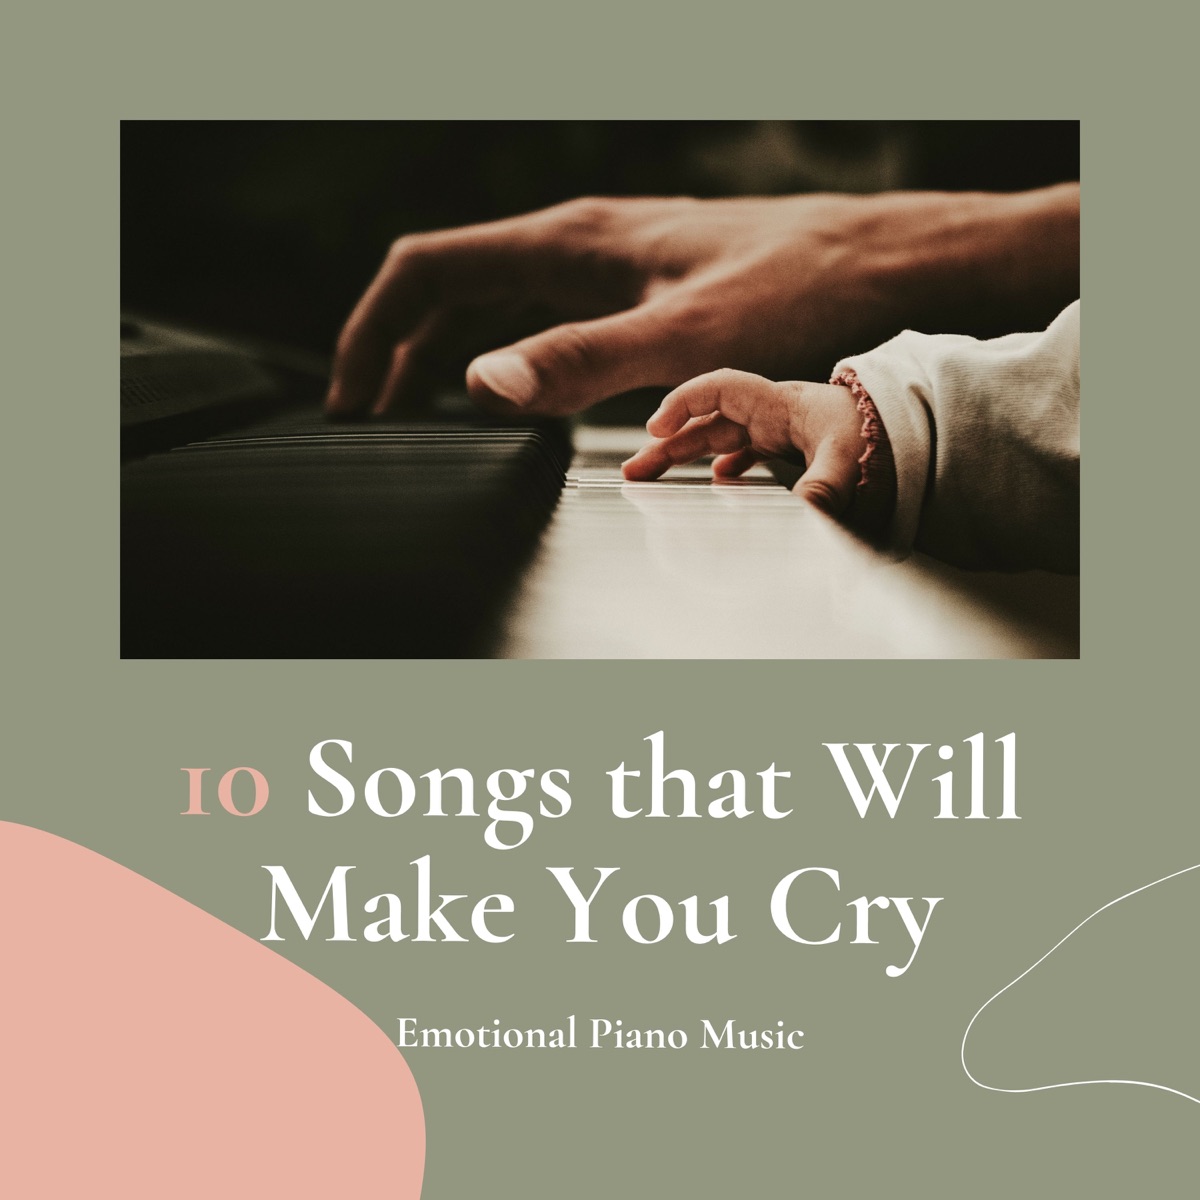 10 Songs that Will Make You Cry - Emotional Piano Music - Album by David  Favorite - Apple Music